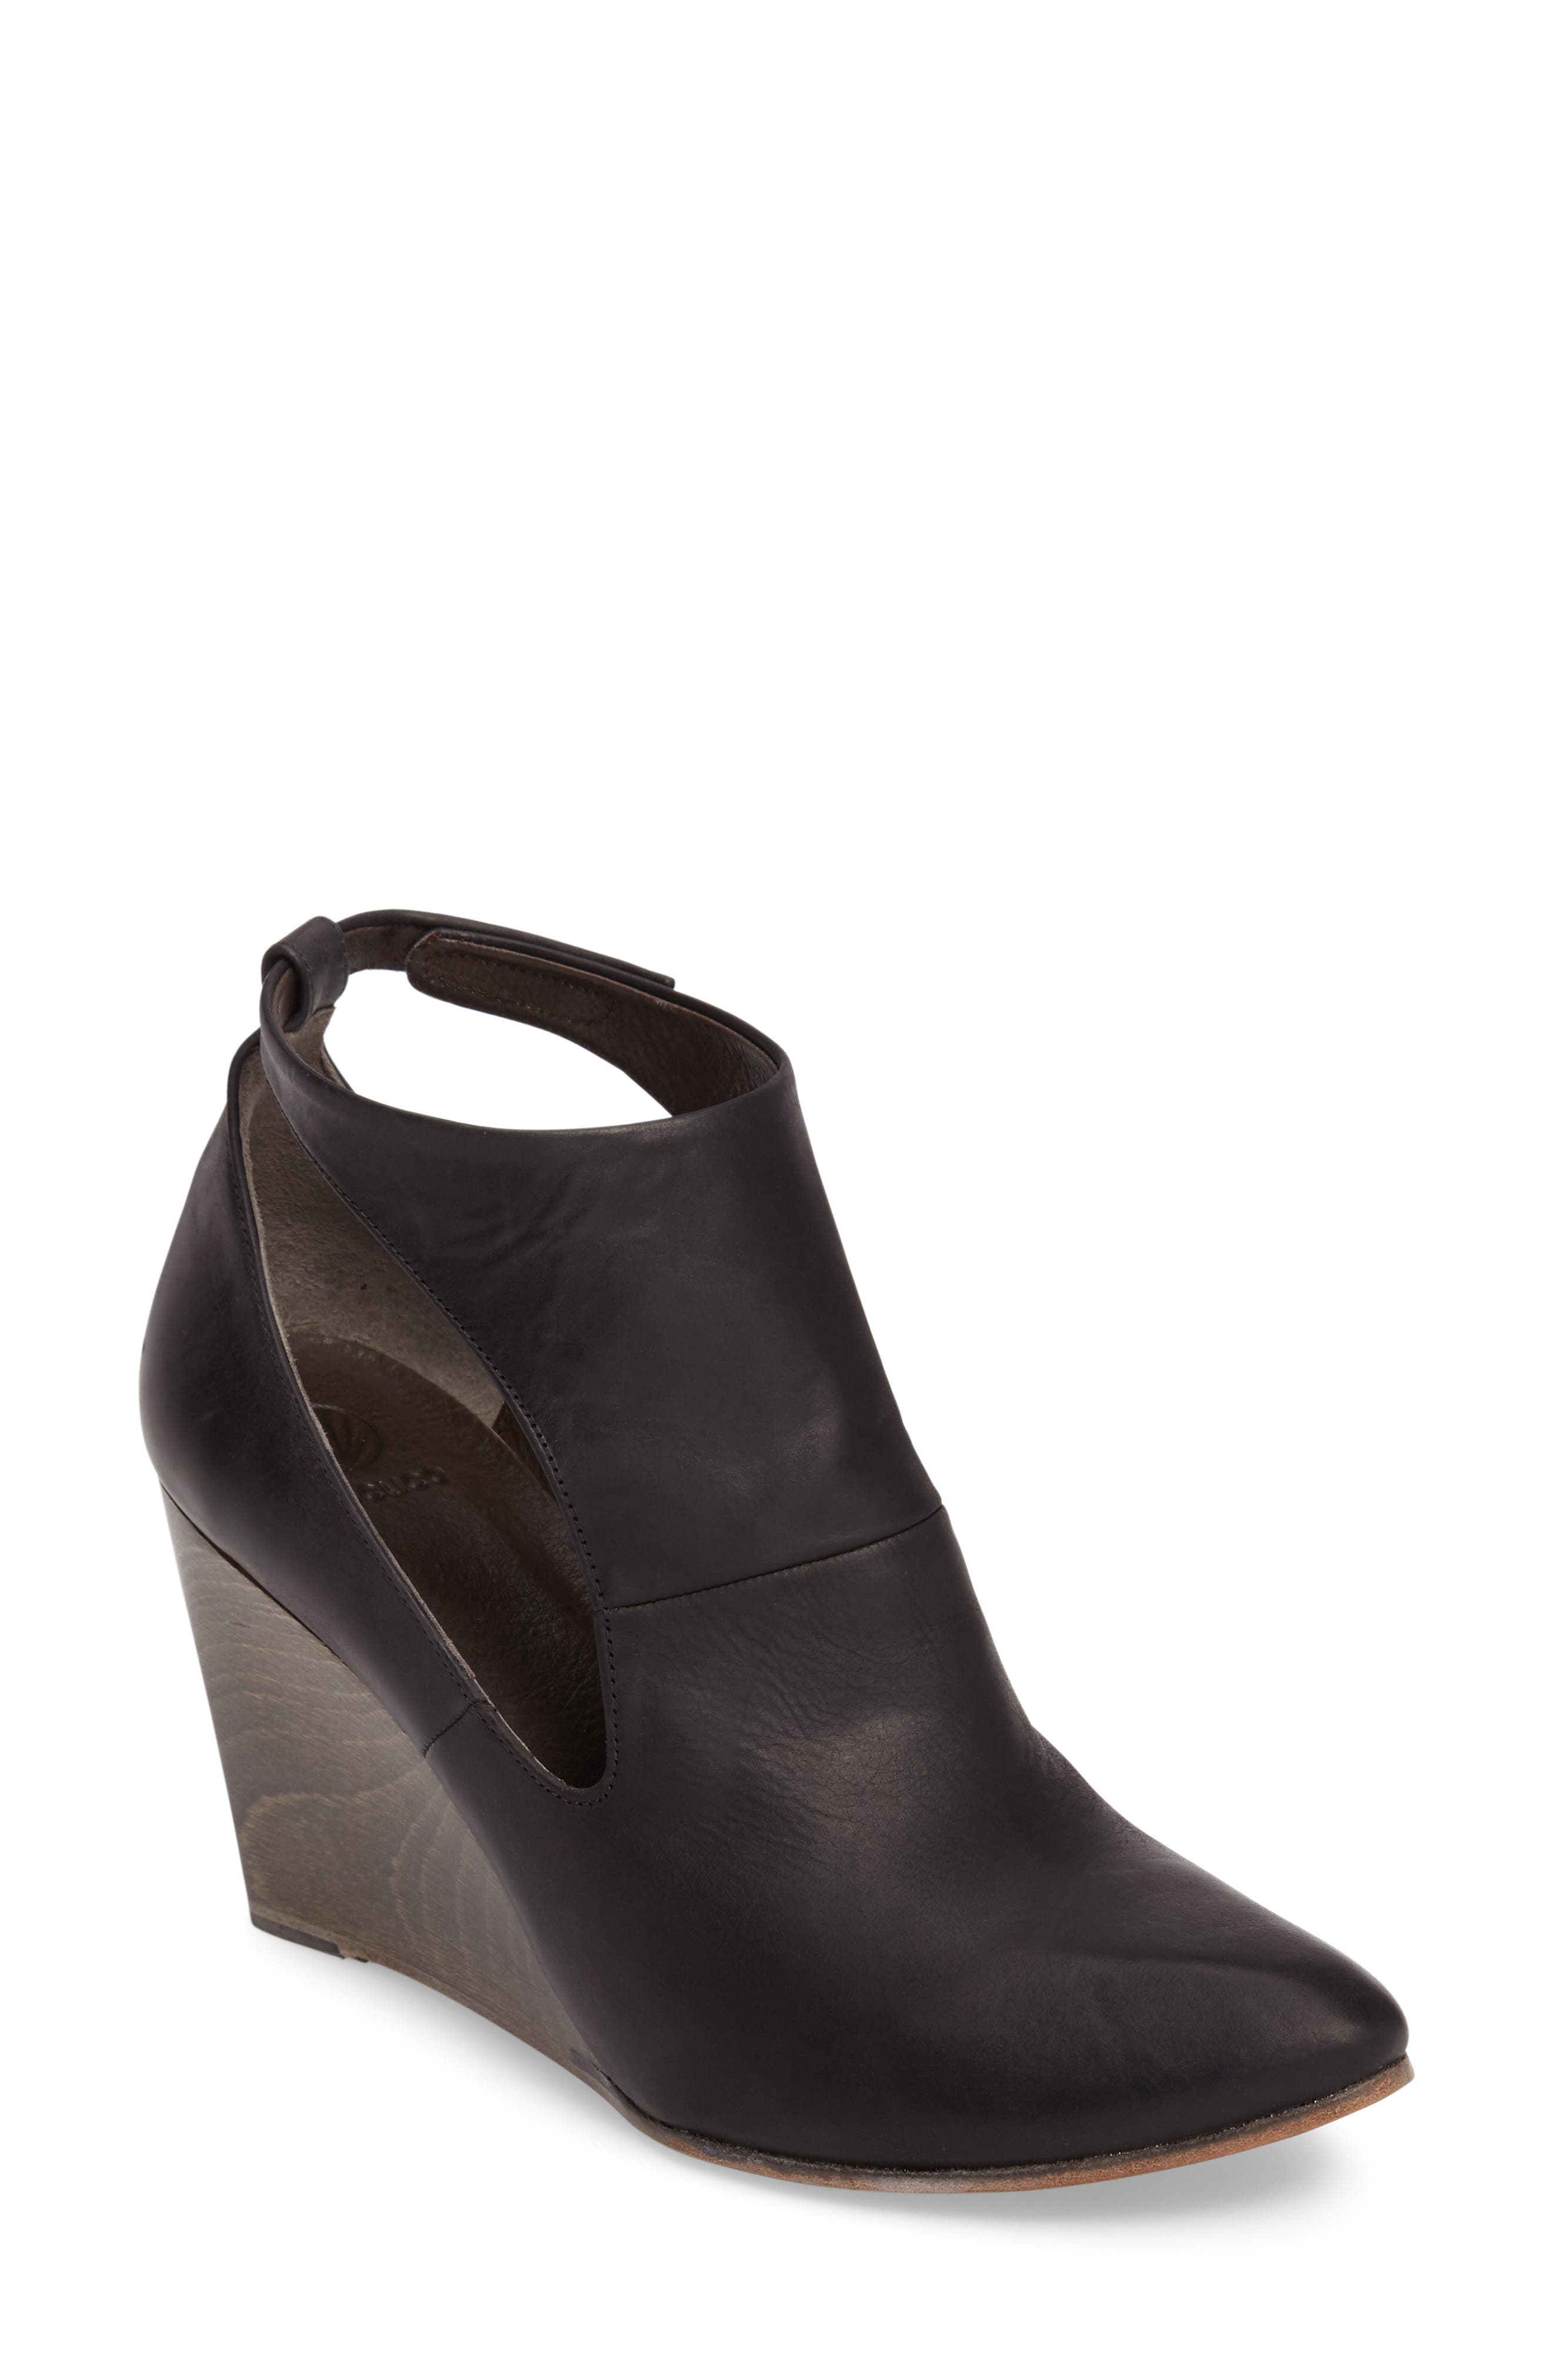 coclico wedges